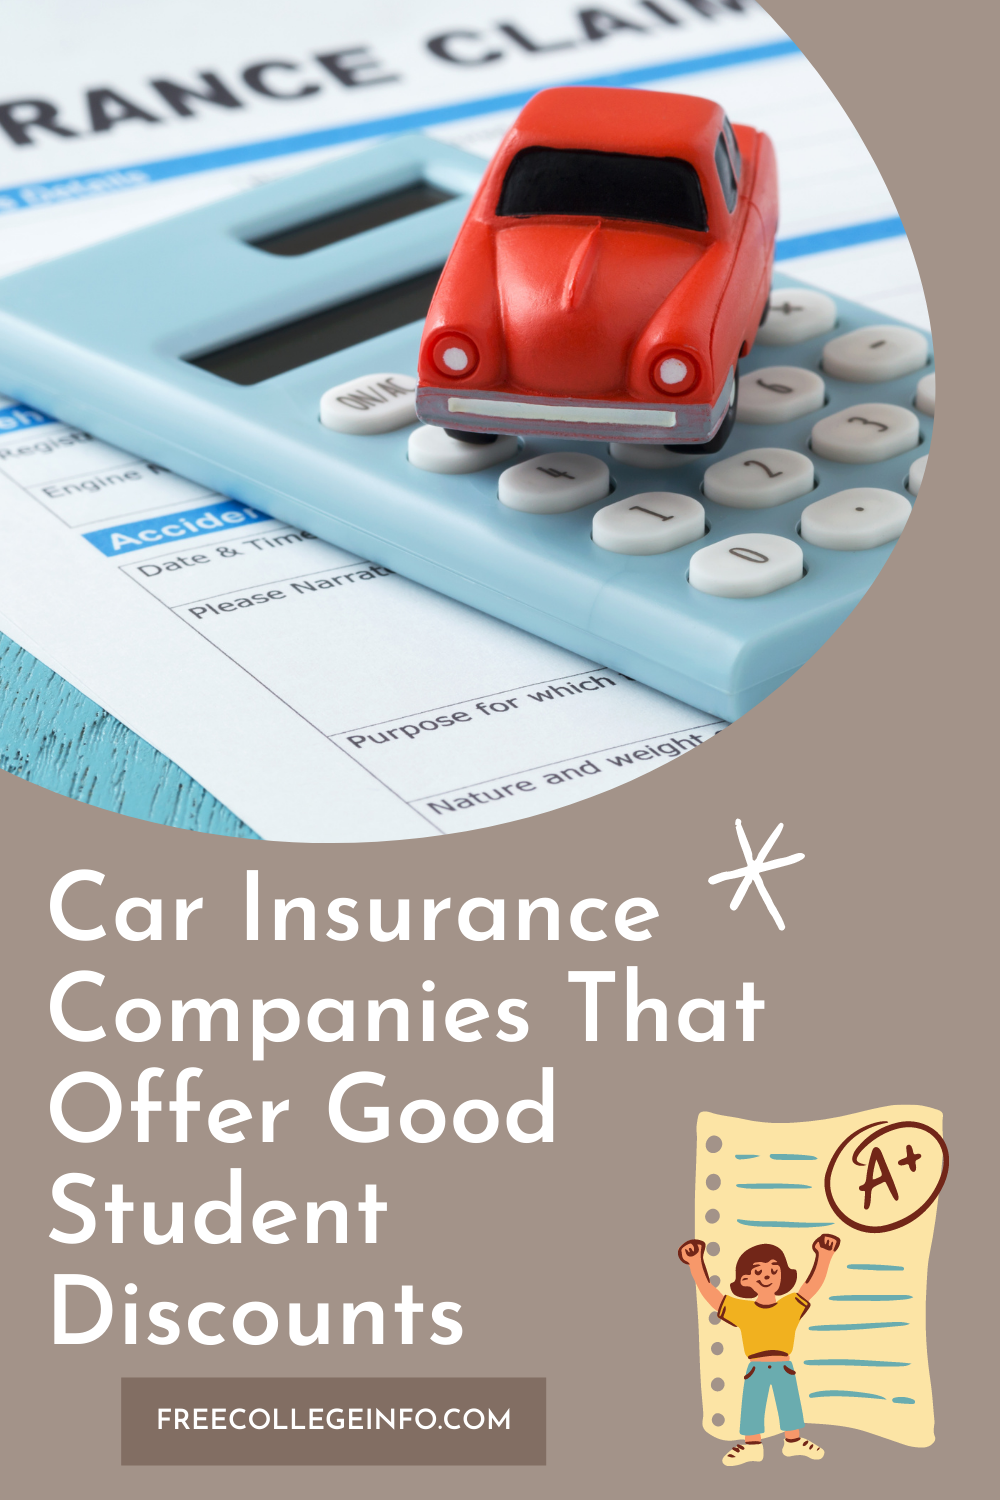 Car Insurance Companies That Offer Good Student Discounts